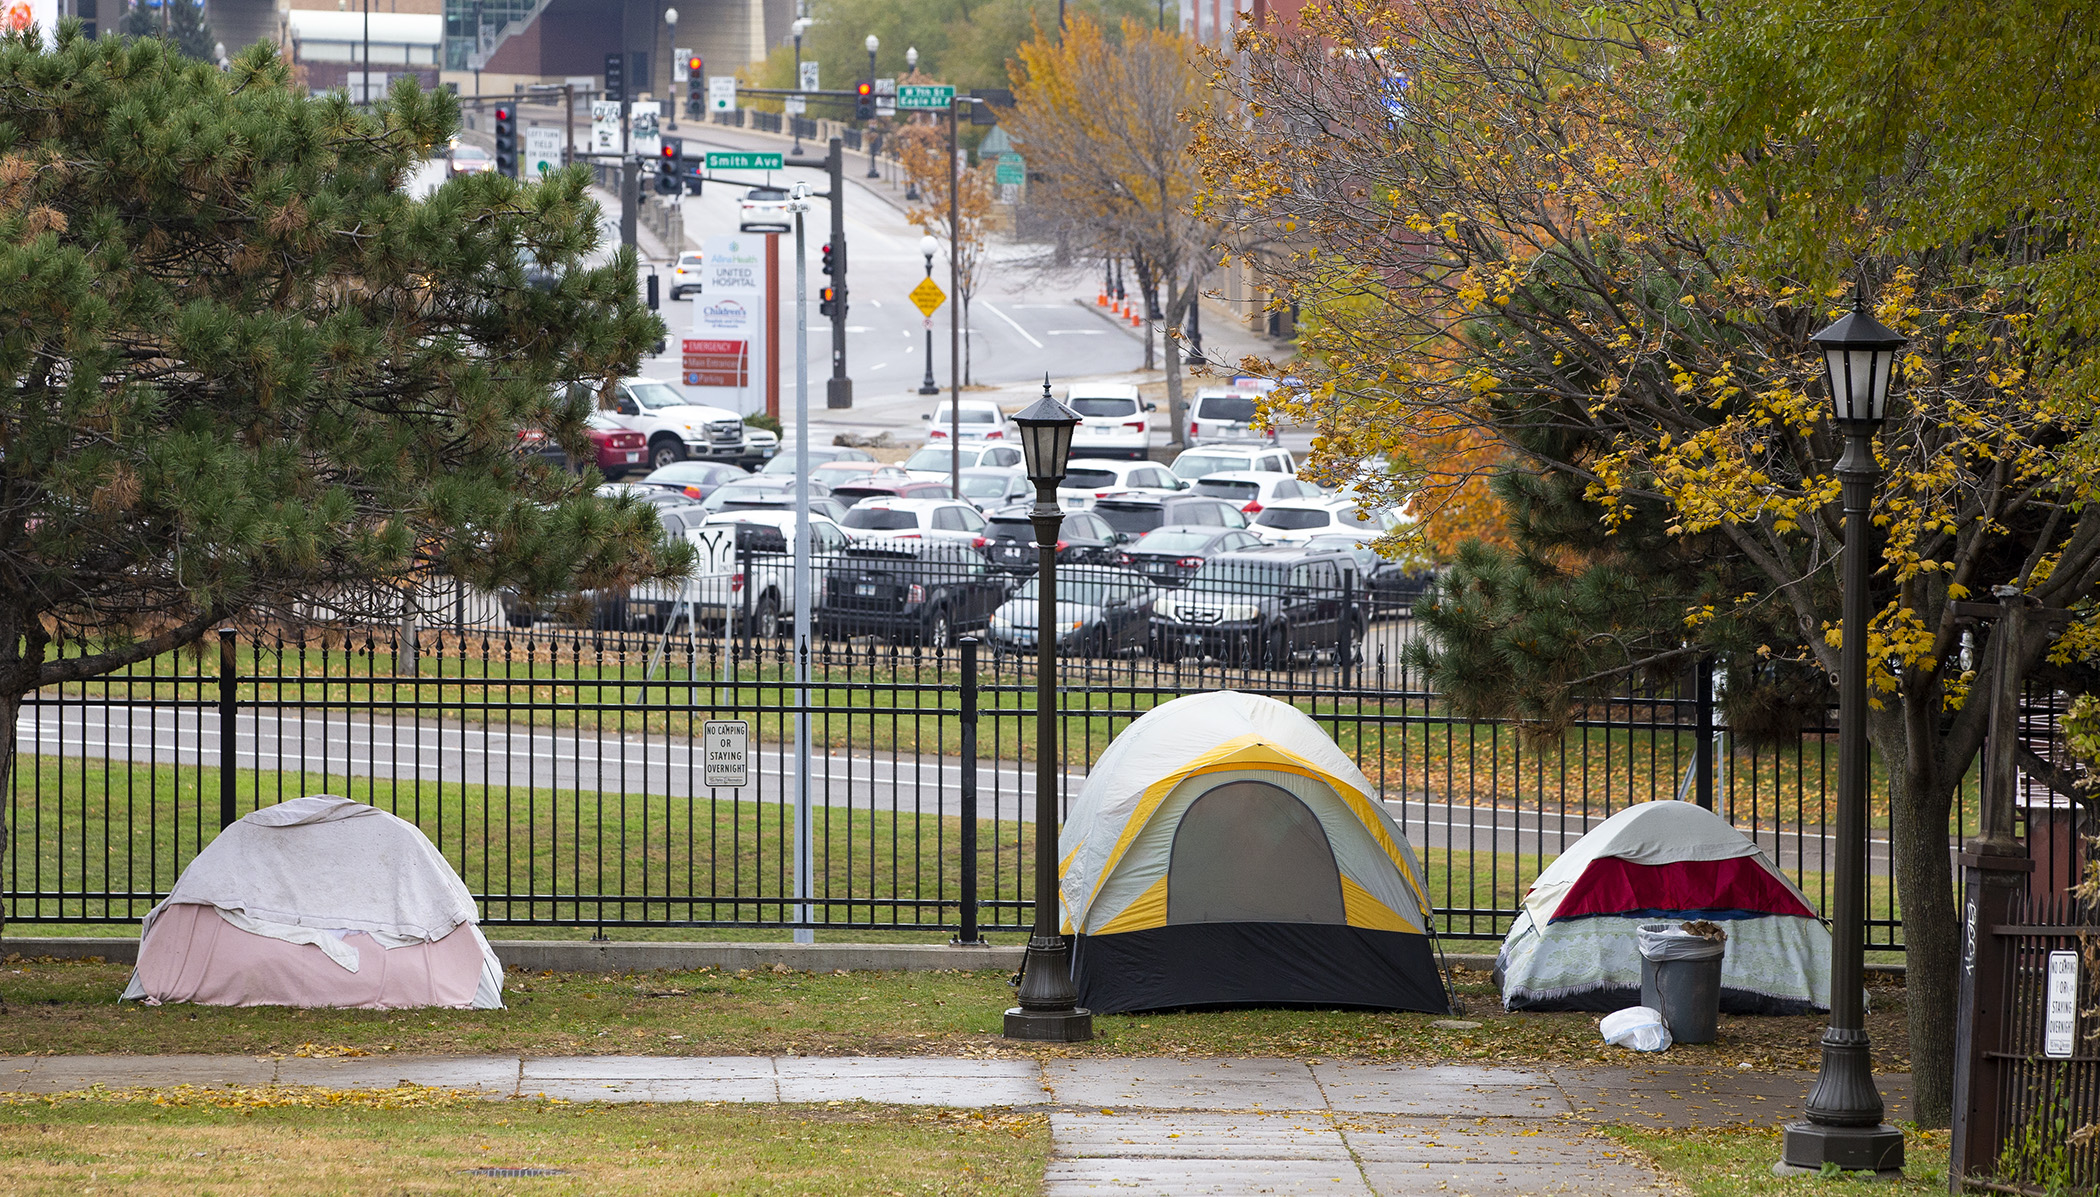 A St. Paul homeless encampment pictured in 2018. House Photography file photo